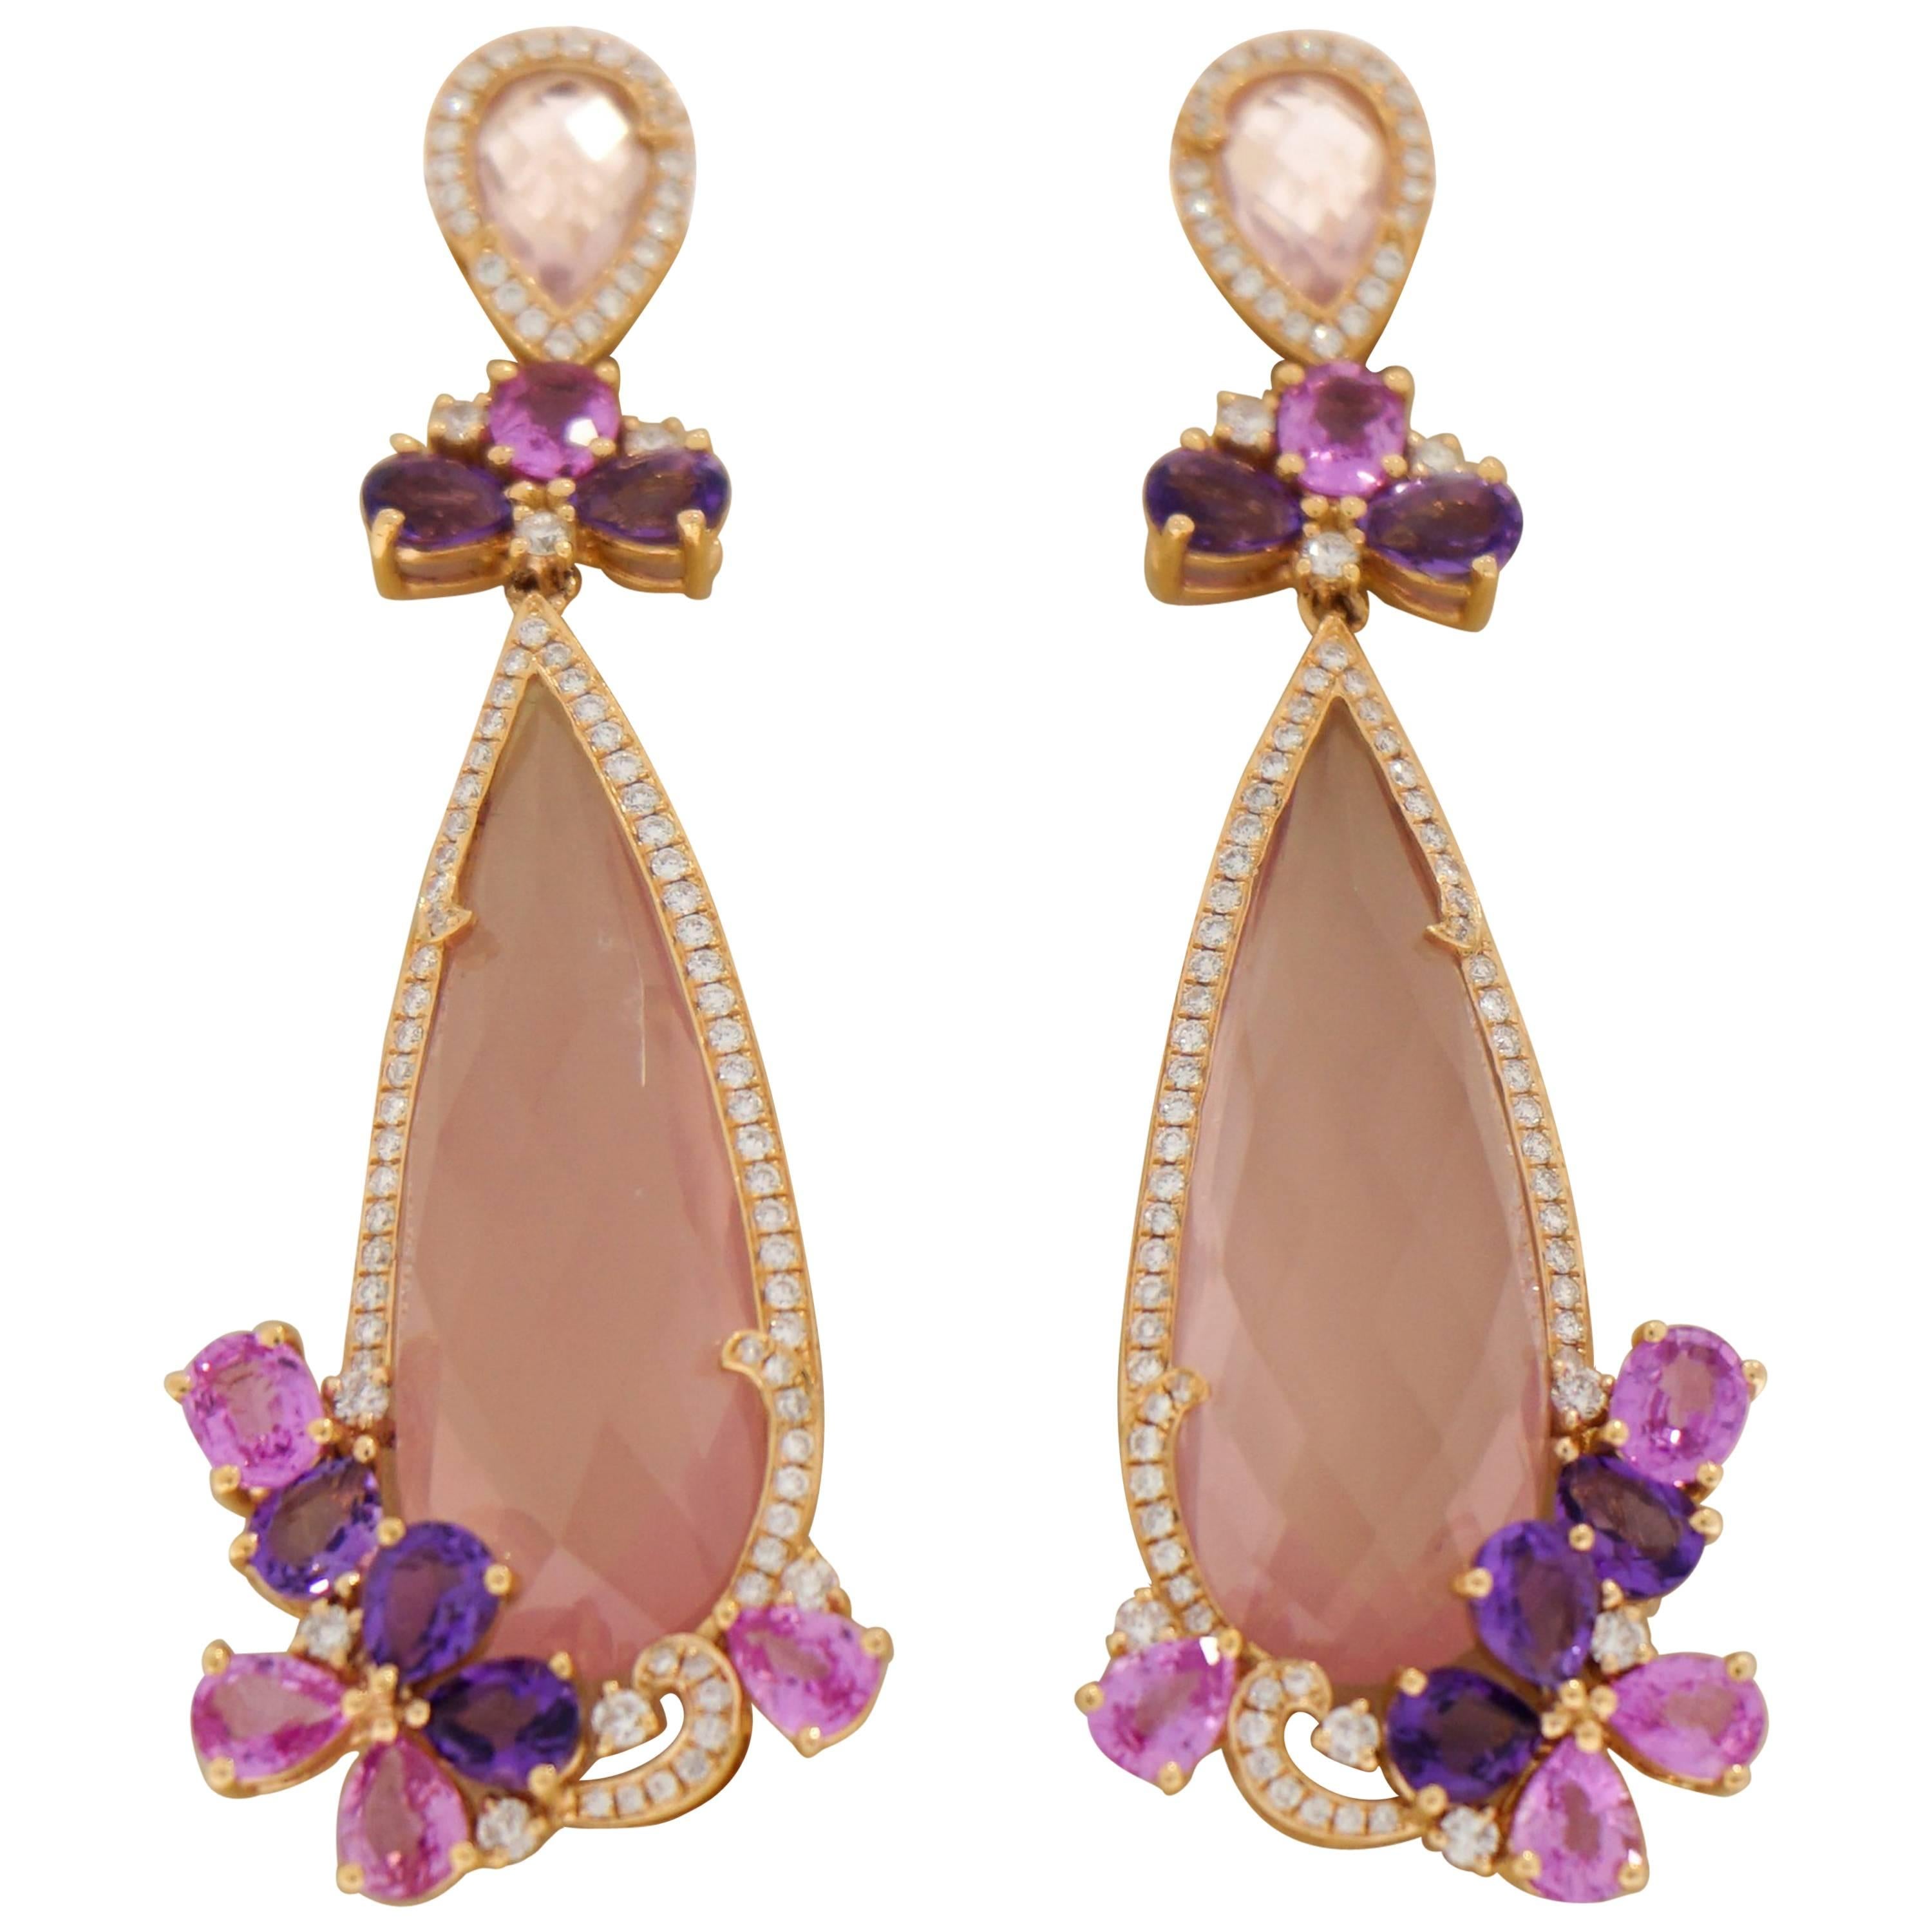 Pear Shaped Pink Quartz, Pinks Sapphires and Amethyst Drop Earrings